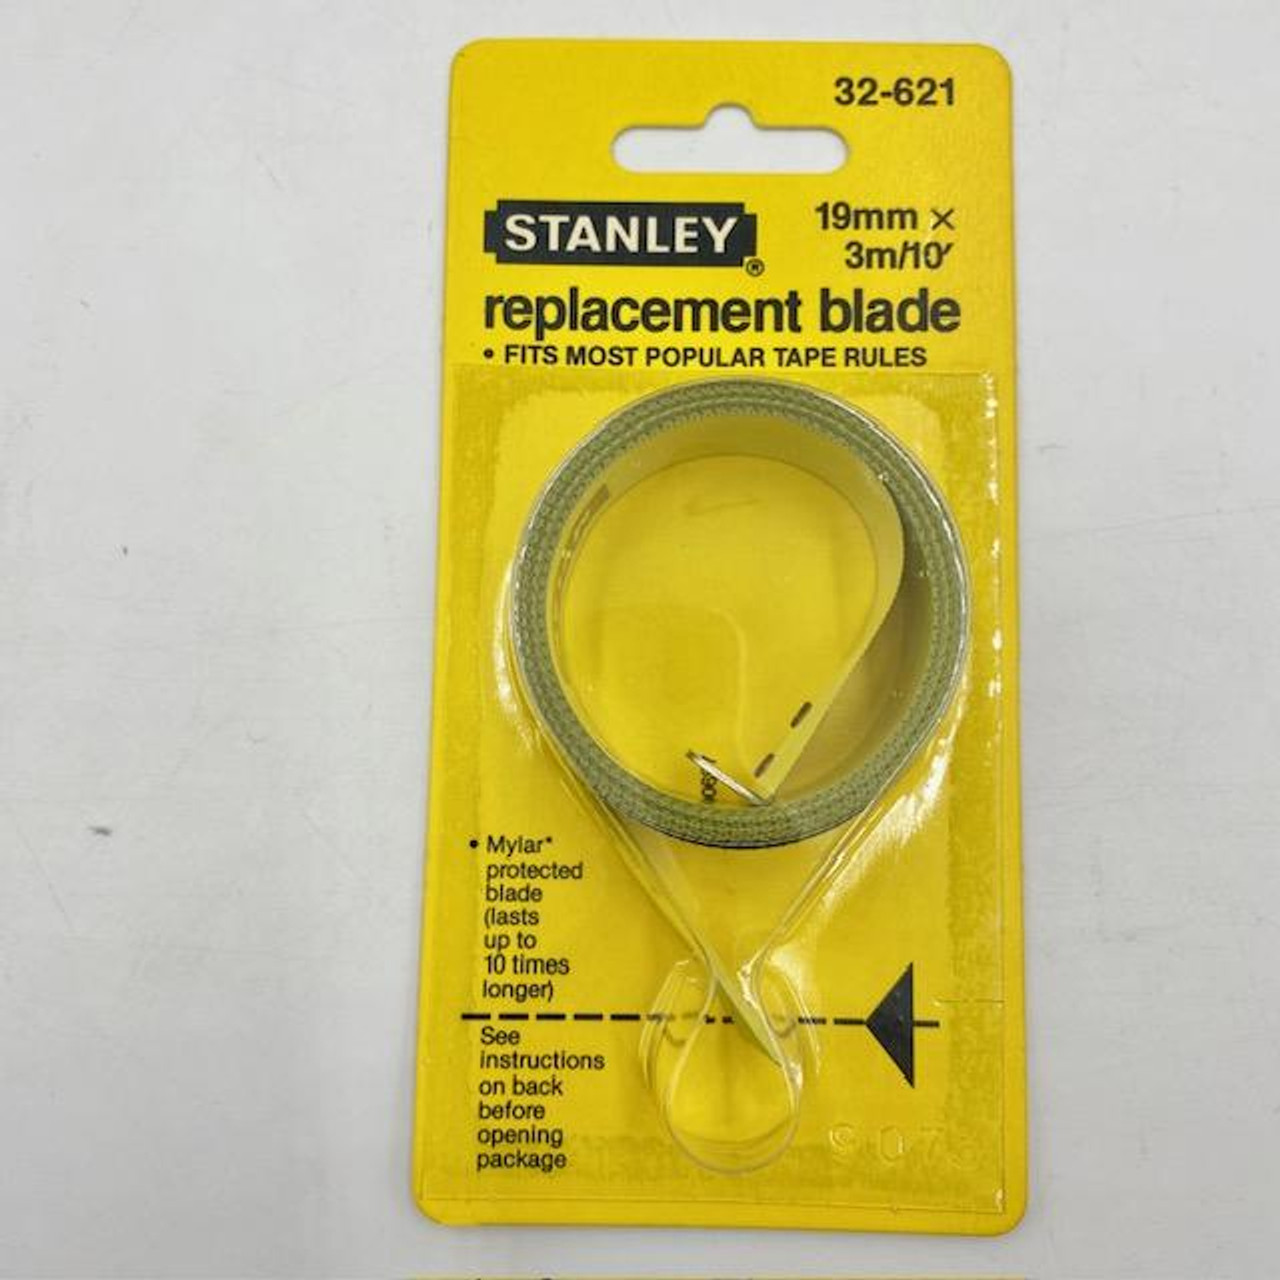 Vintage Stanley 32-621 Replacement Blade, 19mm x 3m/10', Made in U.S.A.